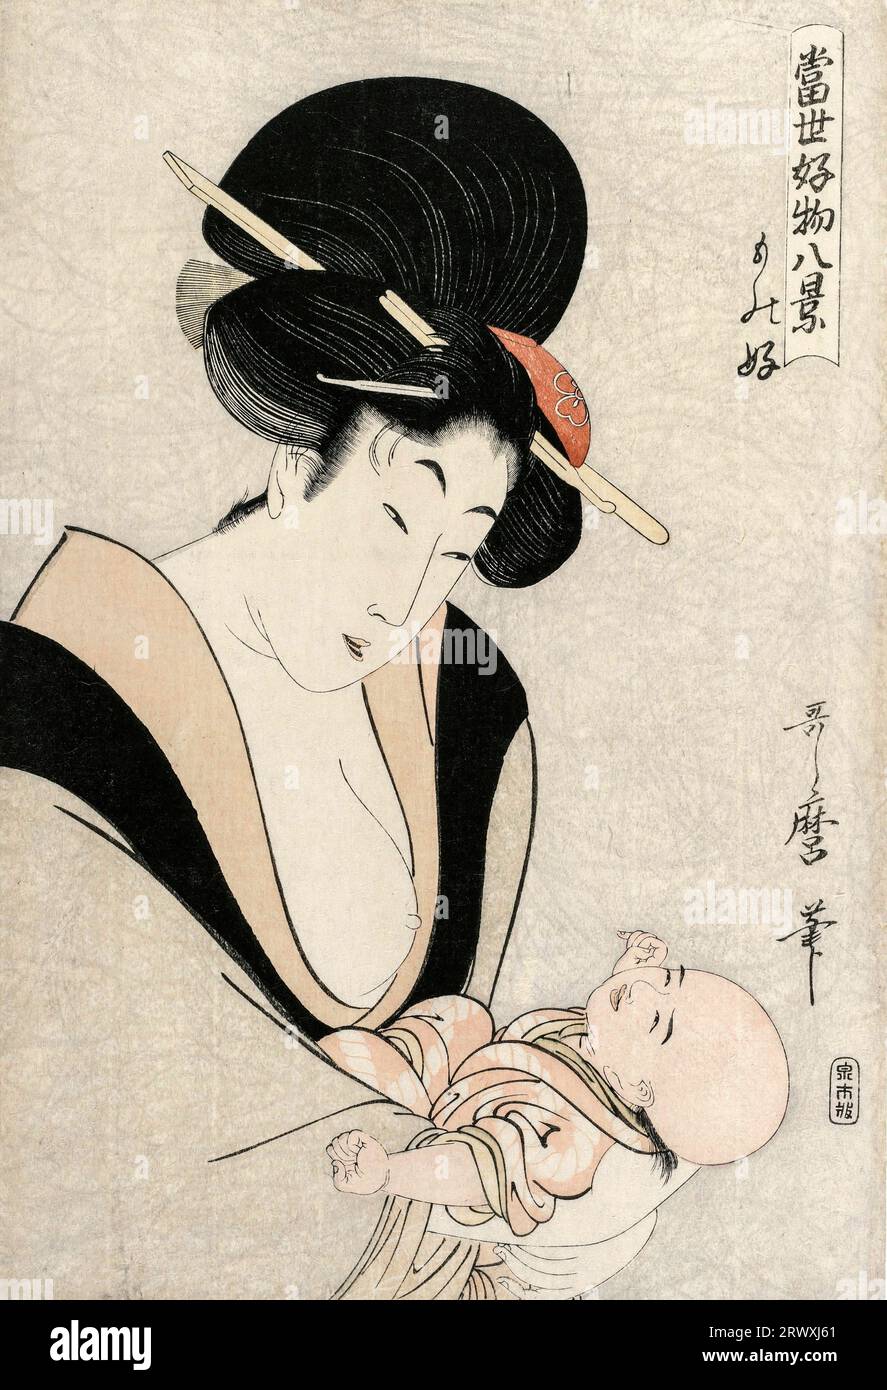 Fond of Things from the series Eight Views of Favorite Things of Today's World  by Kitagawa Utamaro (c. 1753-1806), color woodblock print, late 1790s Stock Photo